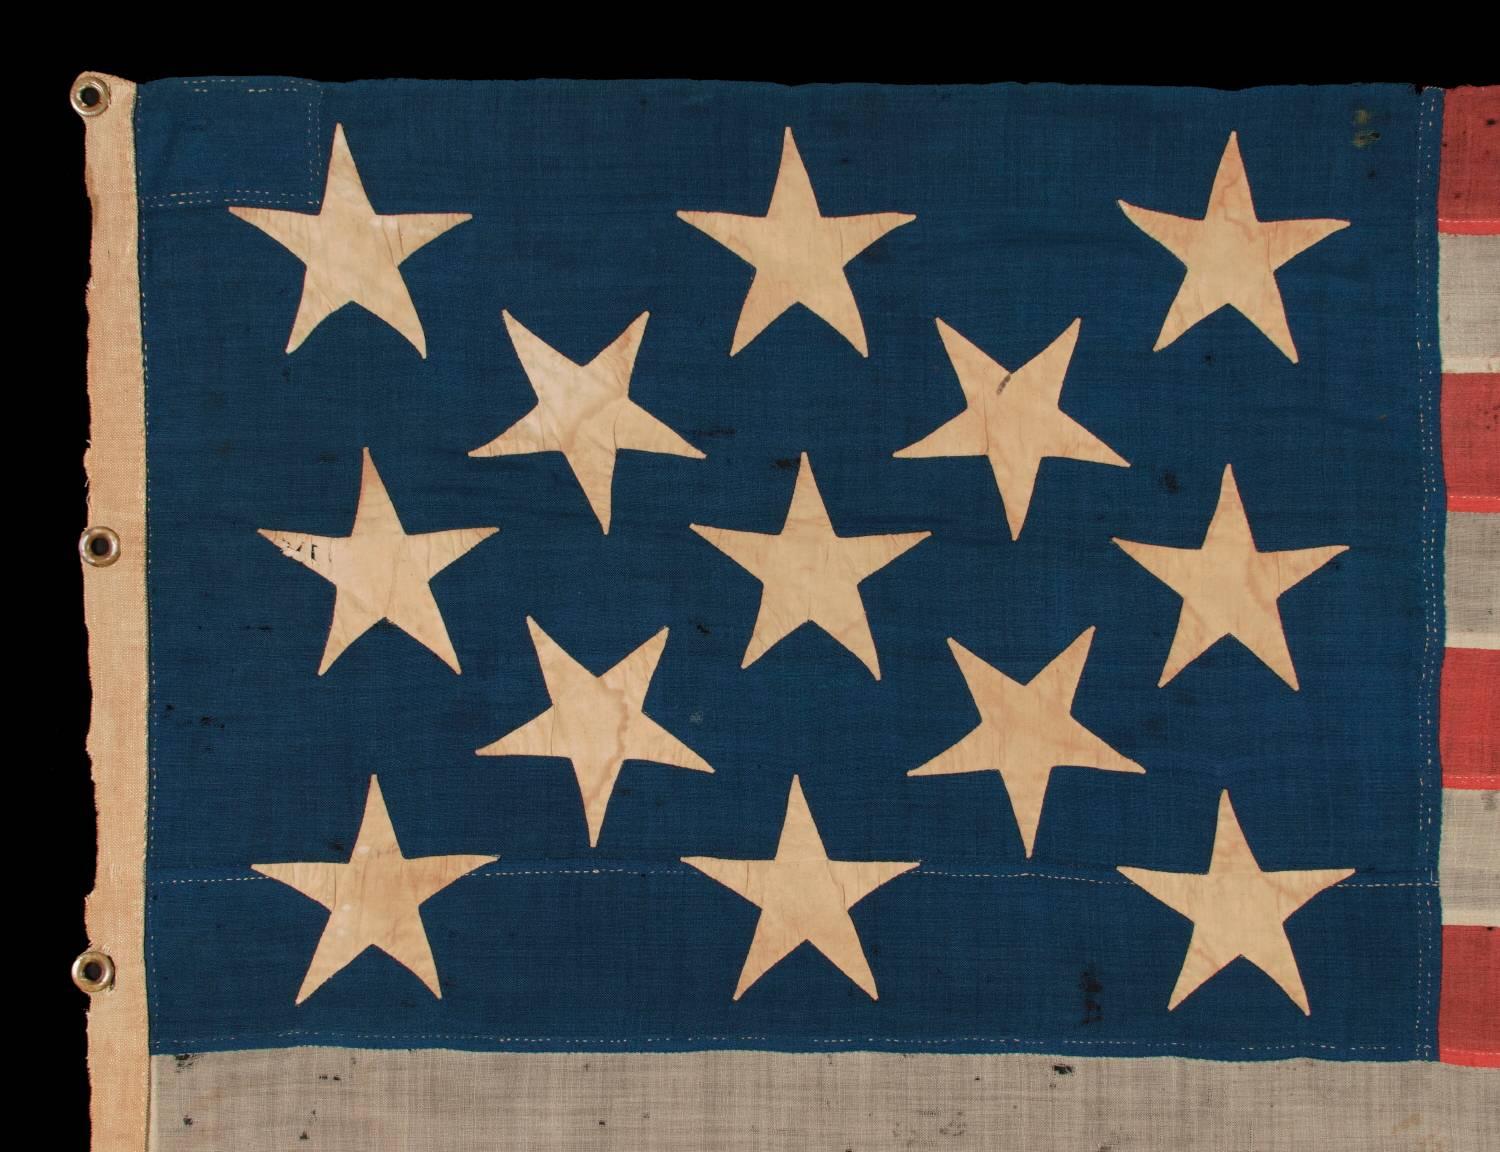 American 13 Large and Strikingly Visual Stars on a U.S Navy Small Boat Ensign Flag